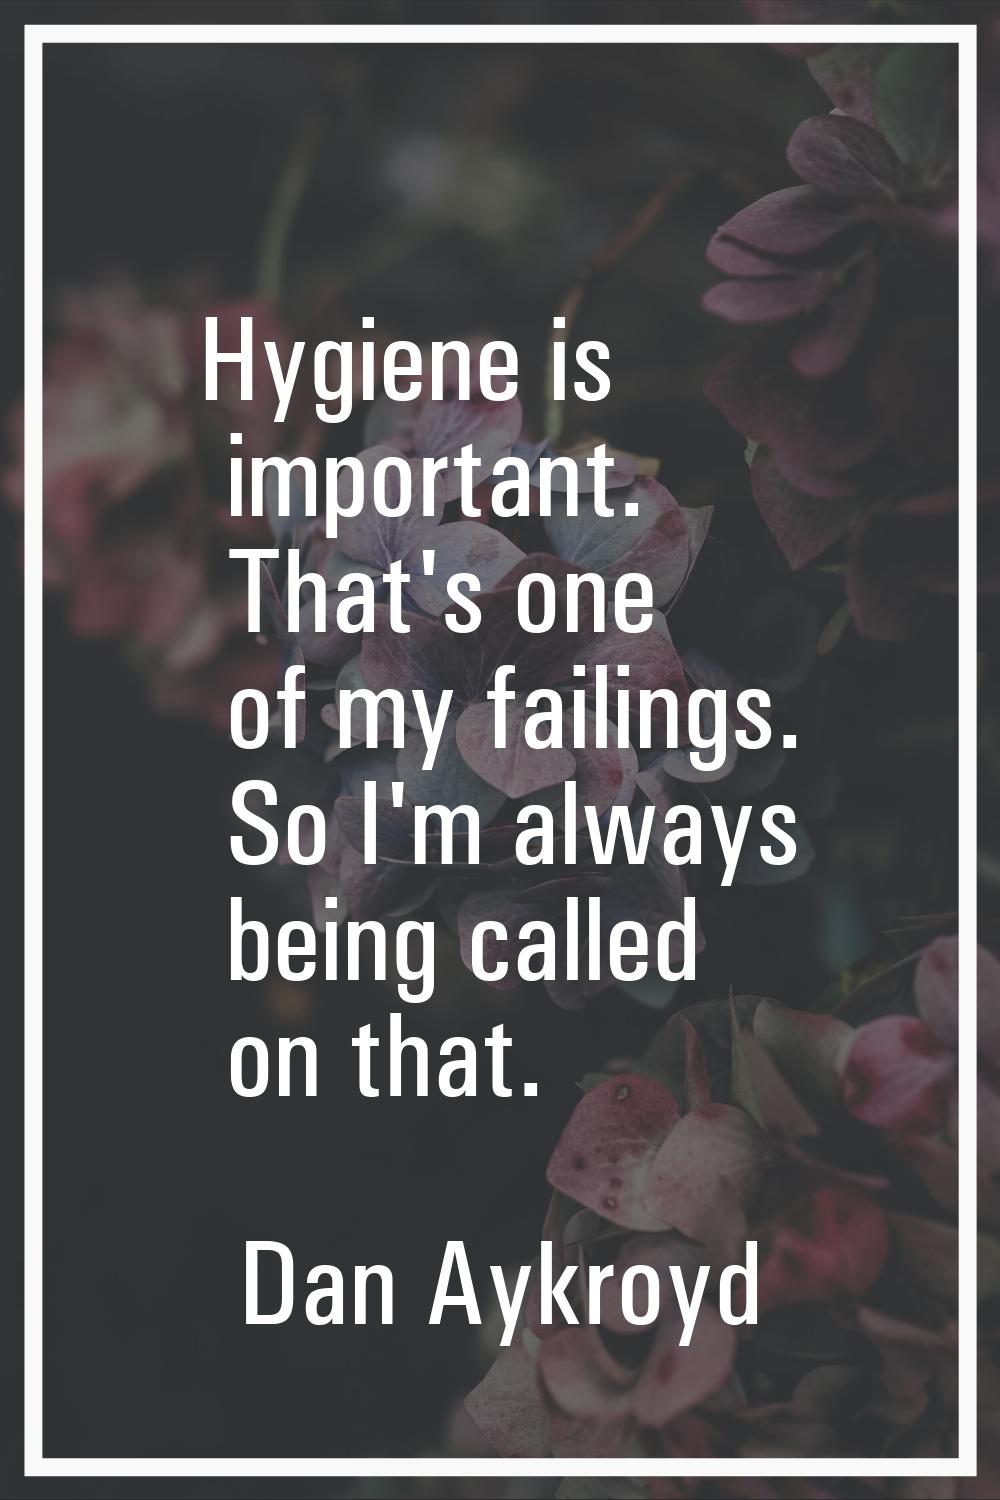 Hygiene is important. That's one of my failings. So I'm always being called on that.